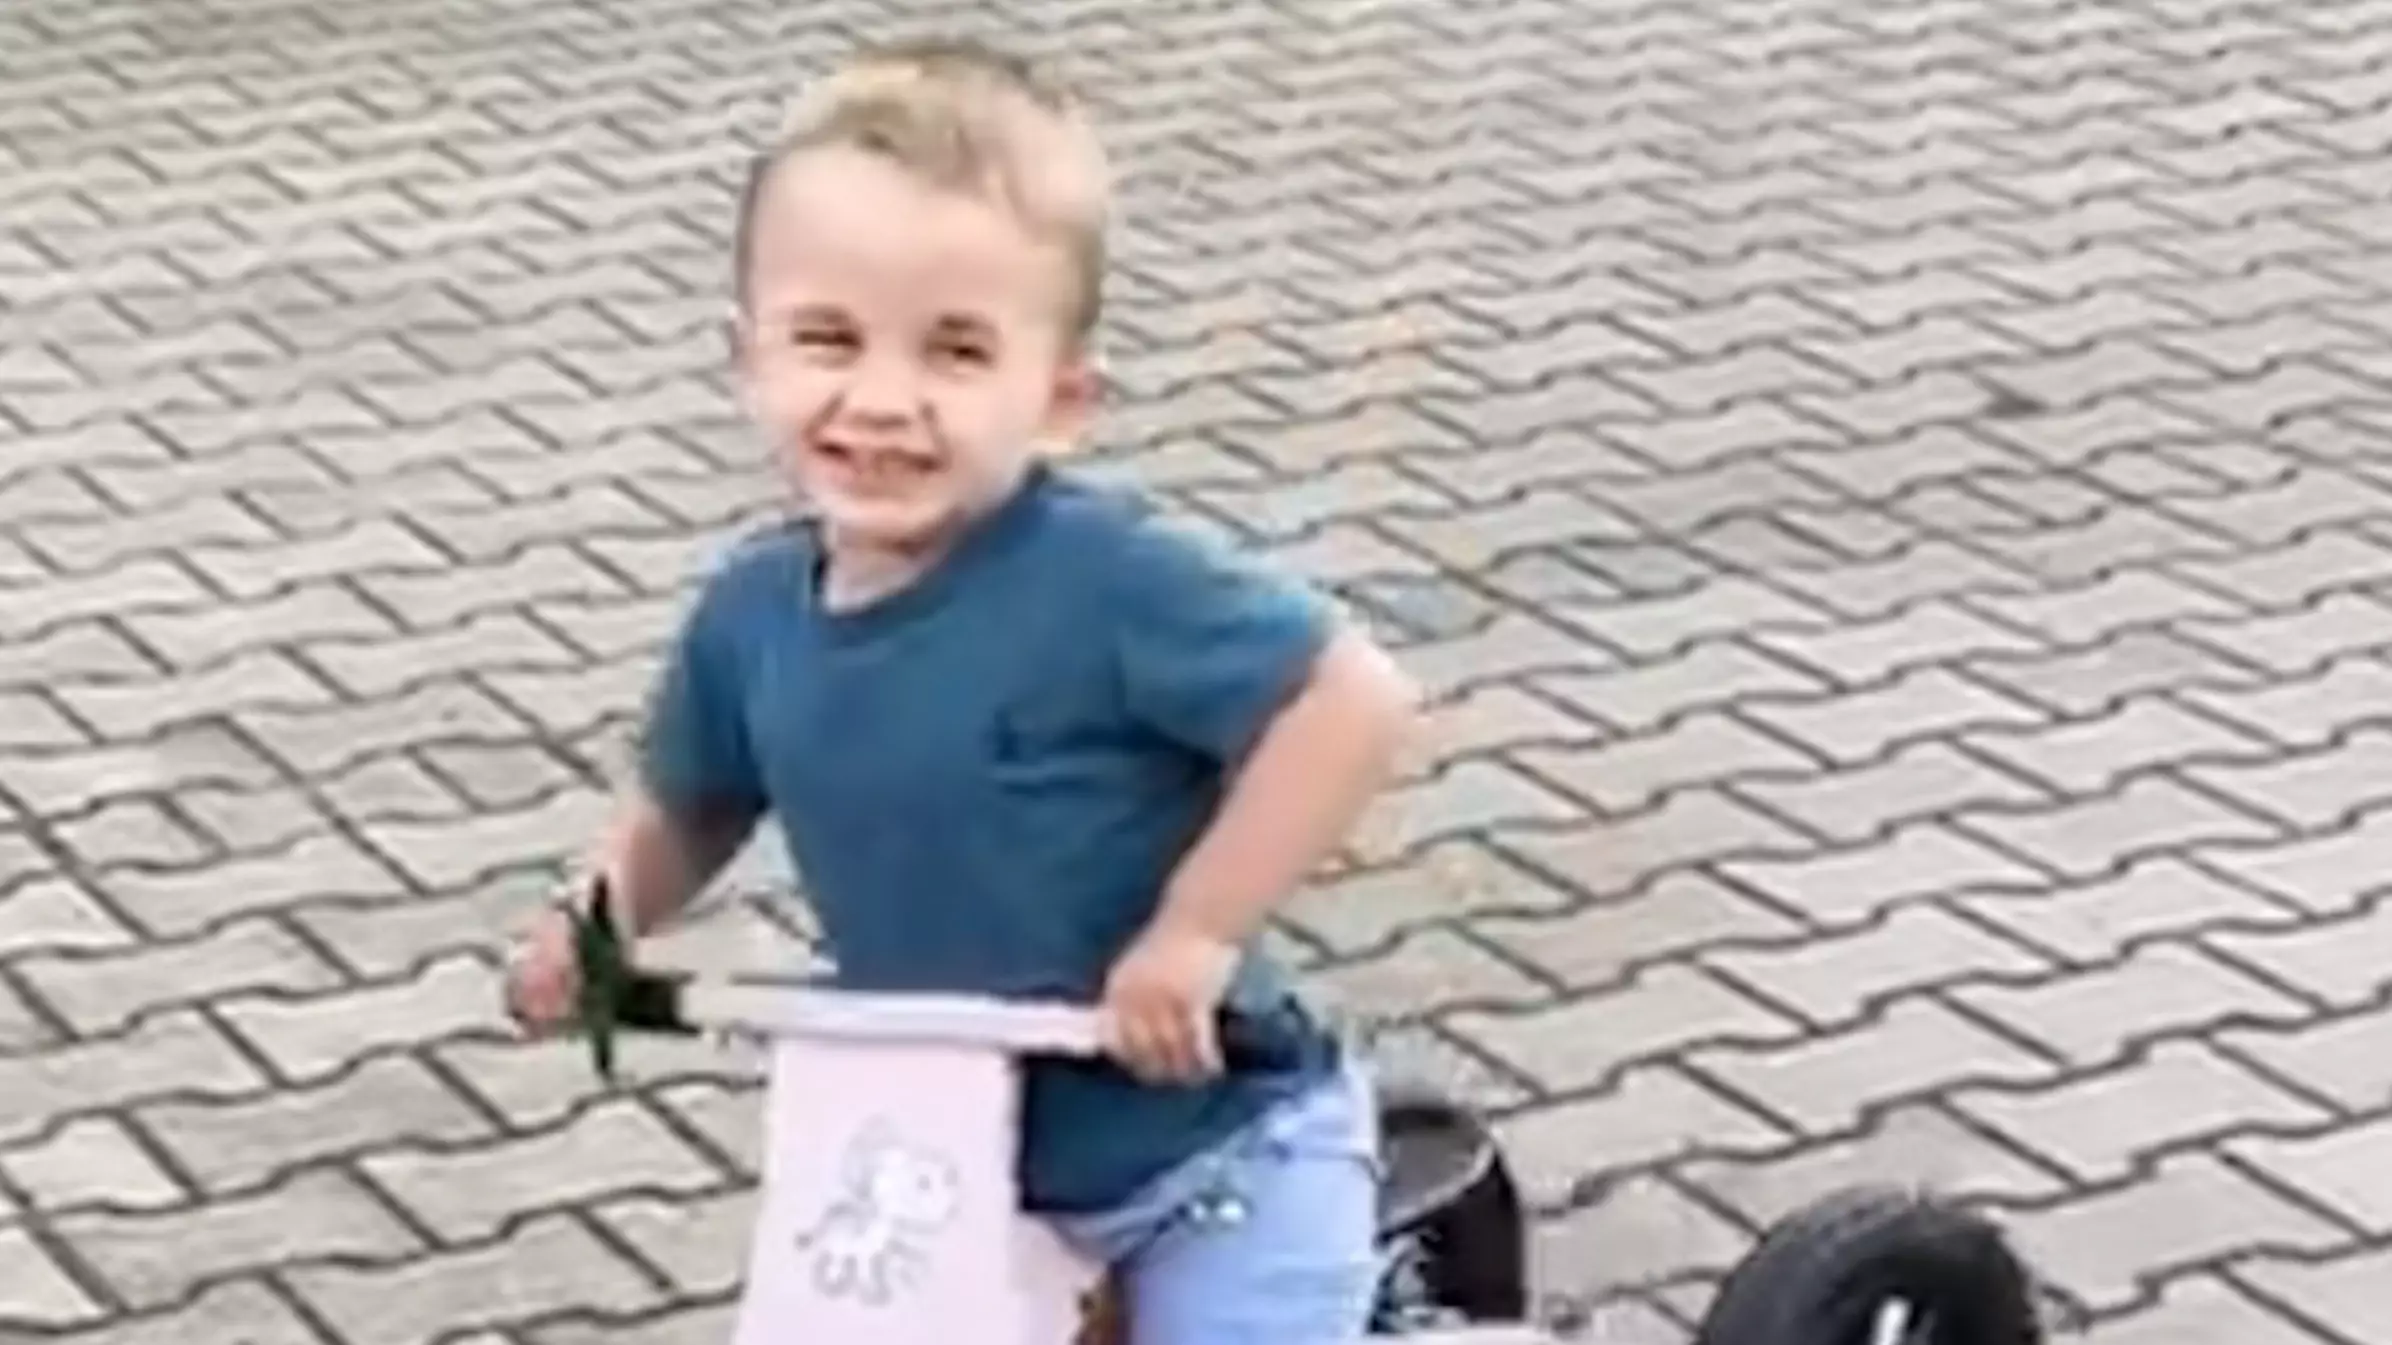 Boy Who Had Both Feet Amputated Rides Bike For First Time